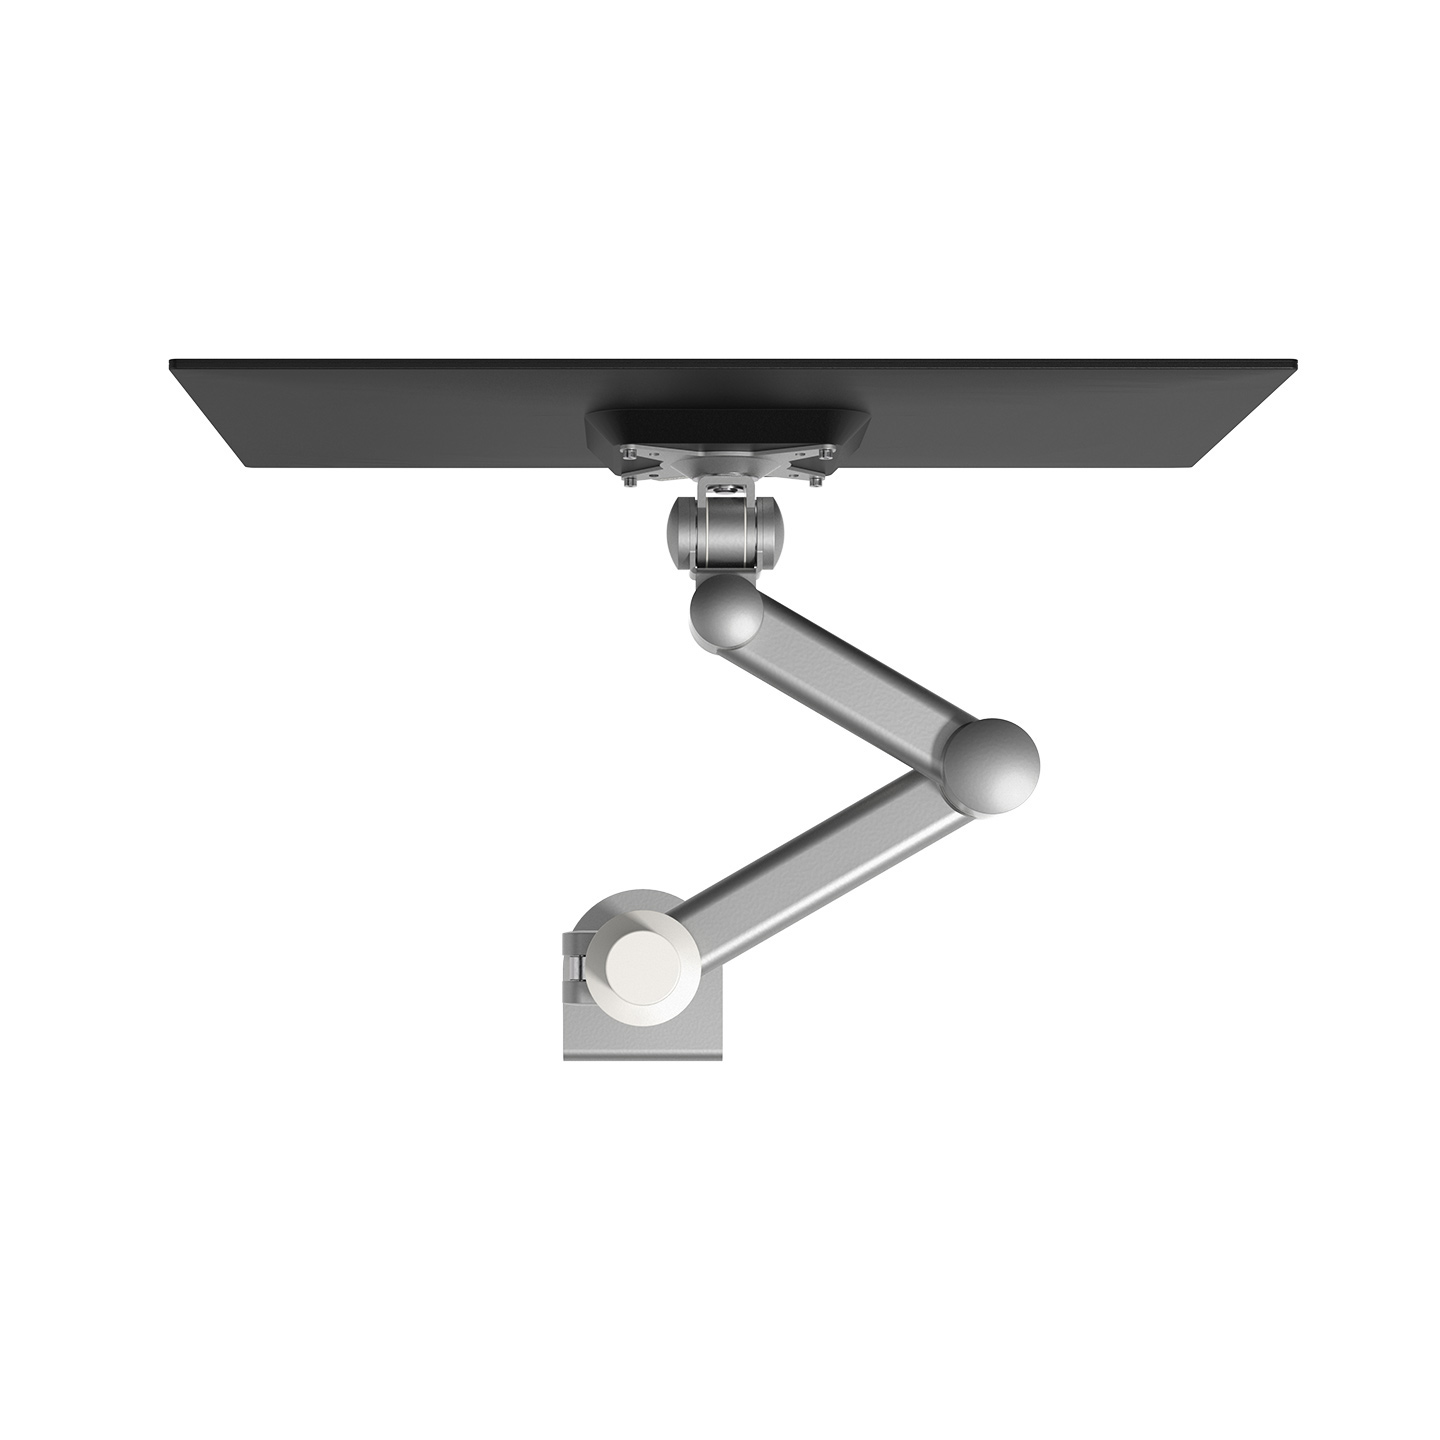 Viewmate monitor arm - desk 662